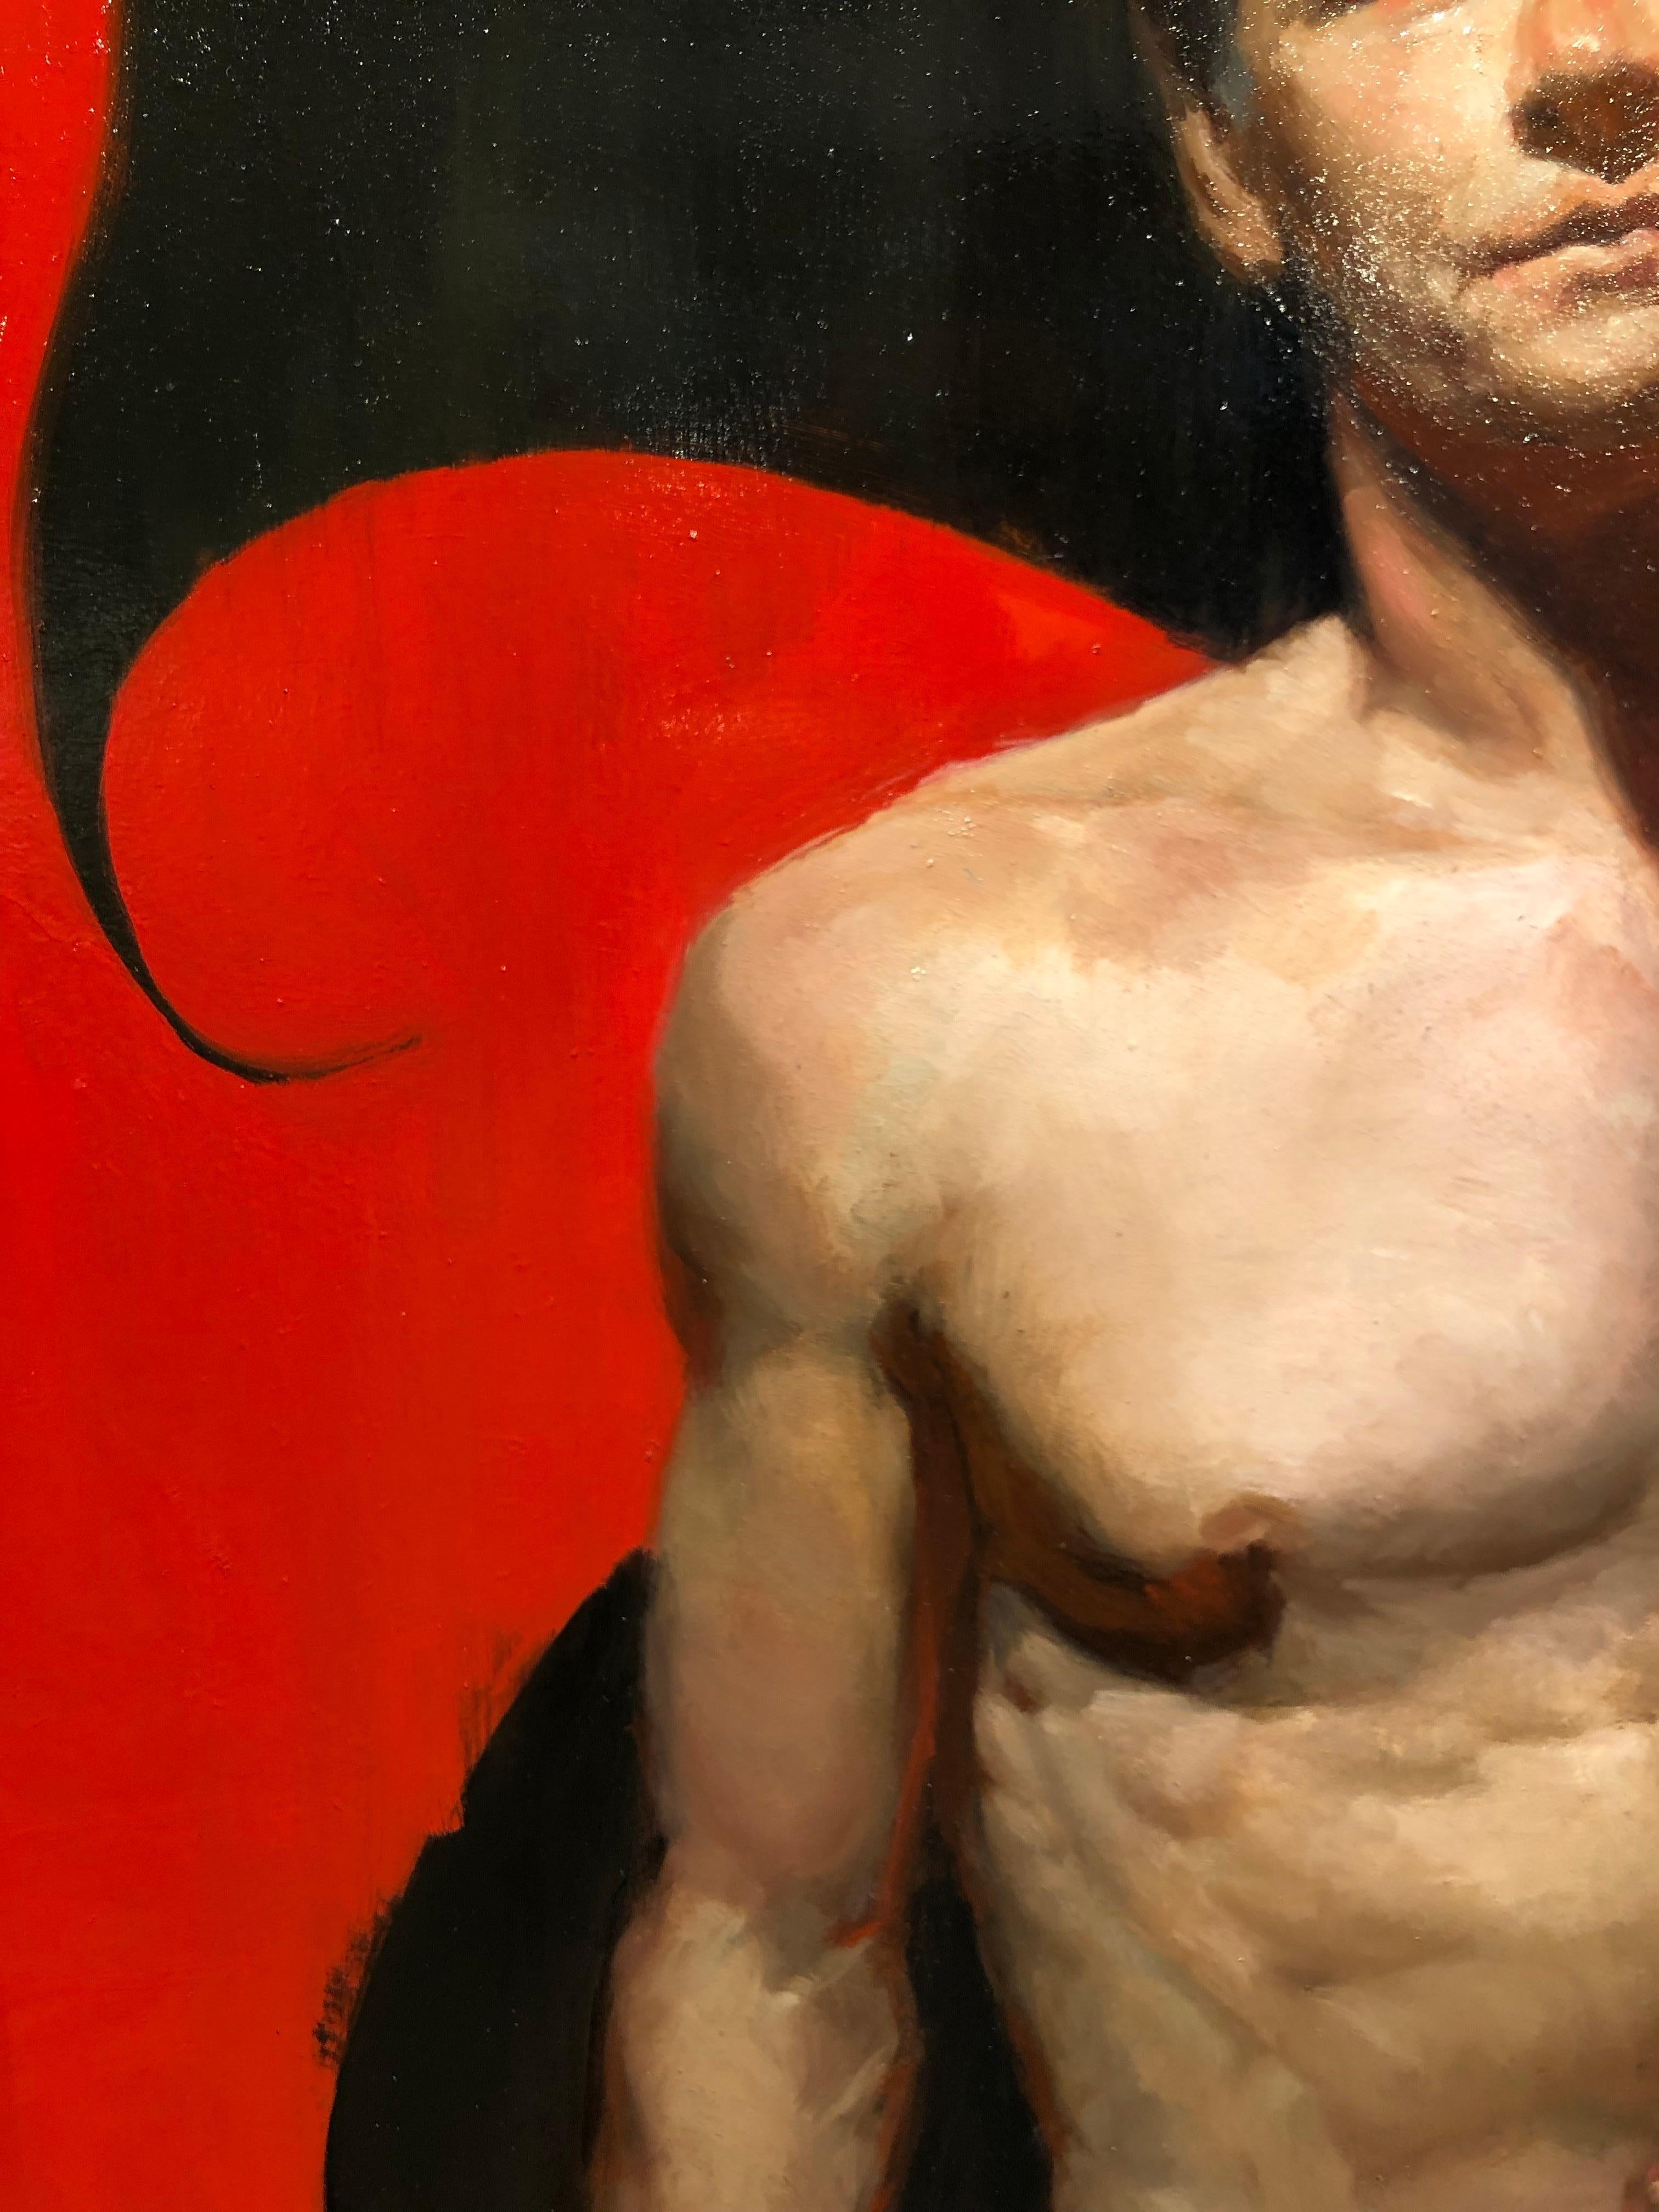 Contemporary shirtless male figure passes in front of bright and dramatic painted red background with a giant number 